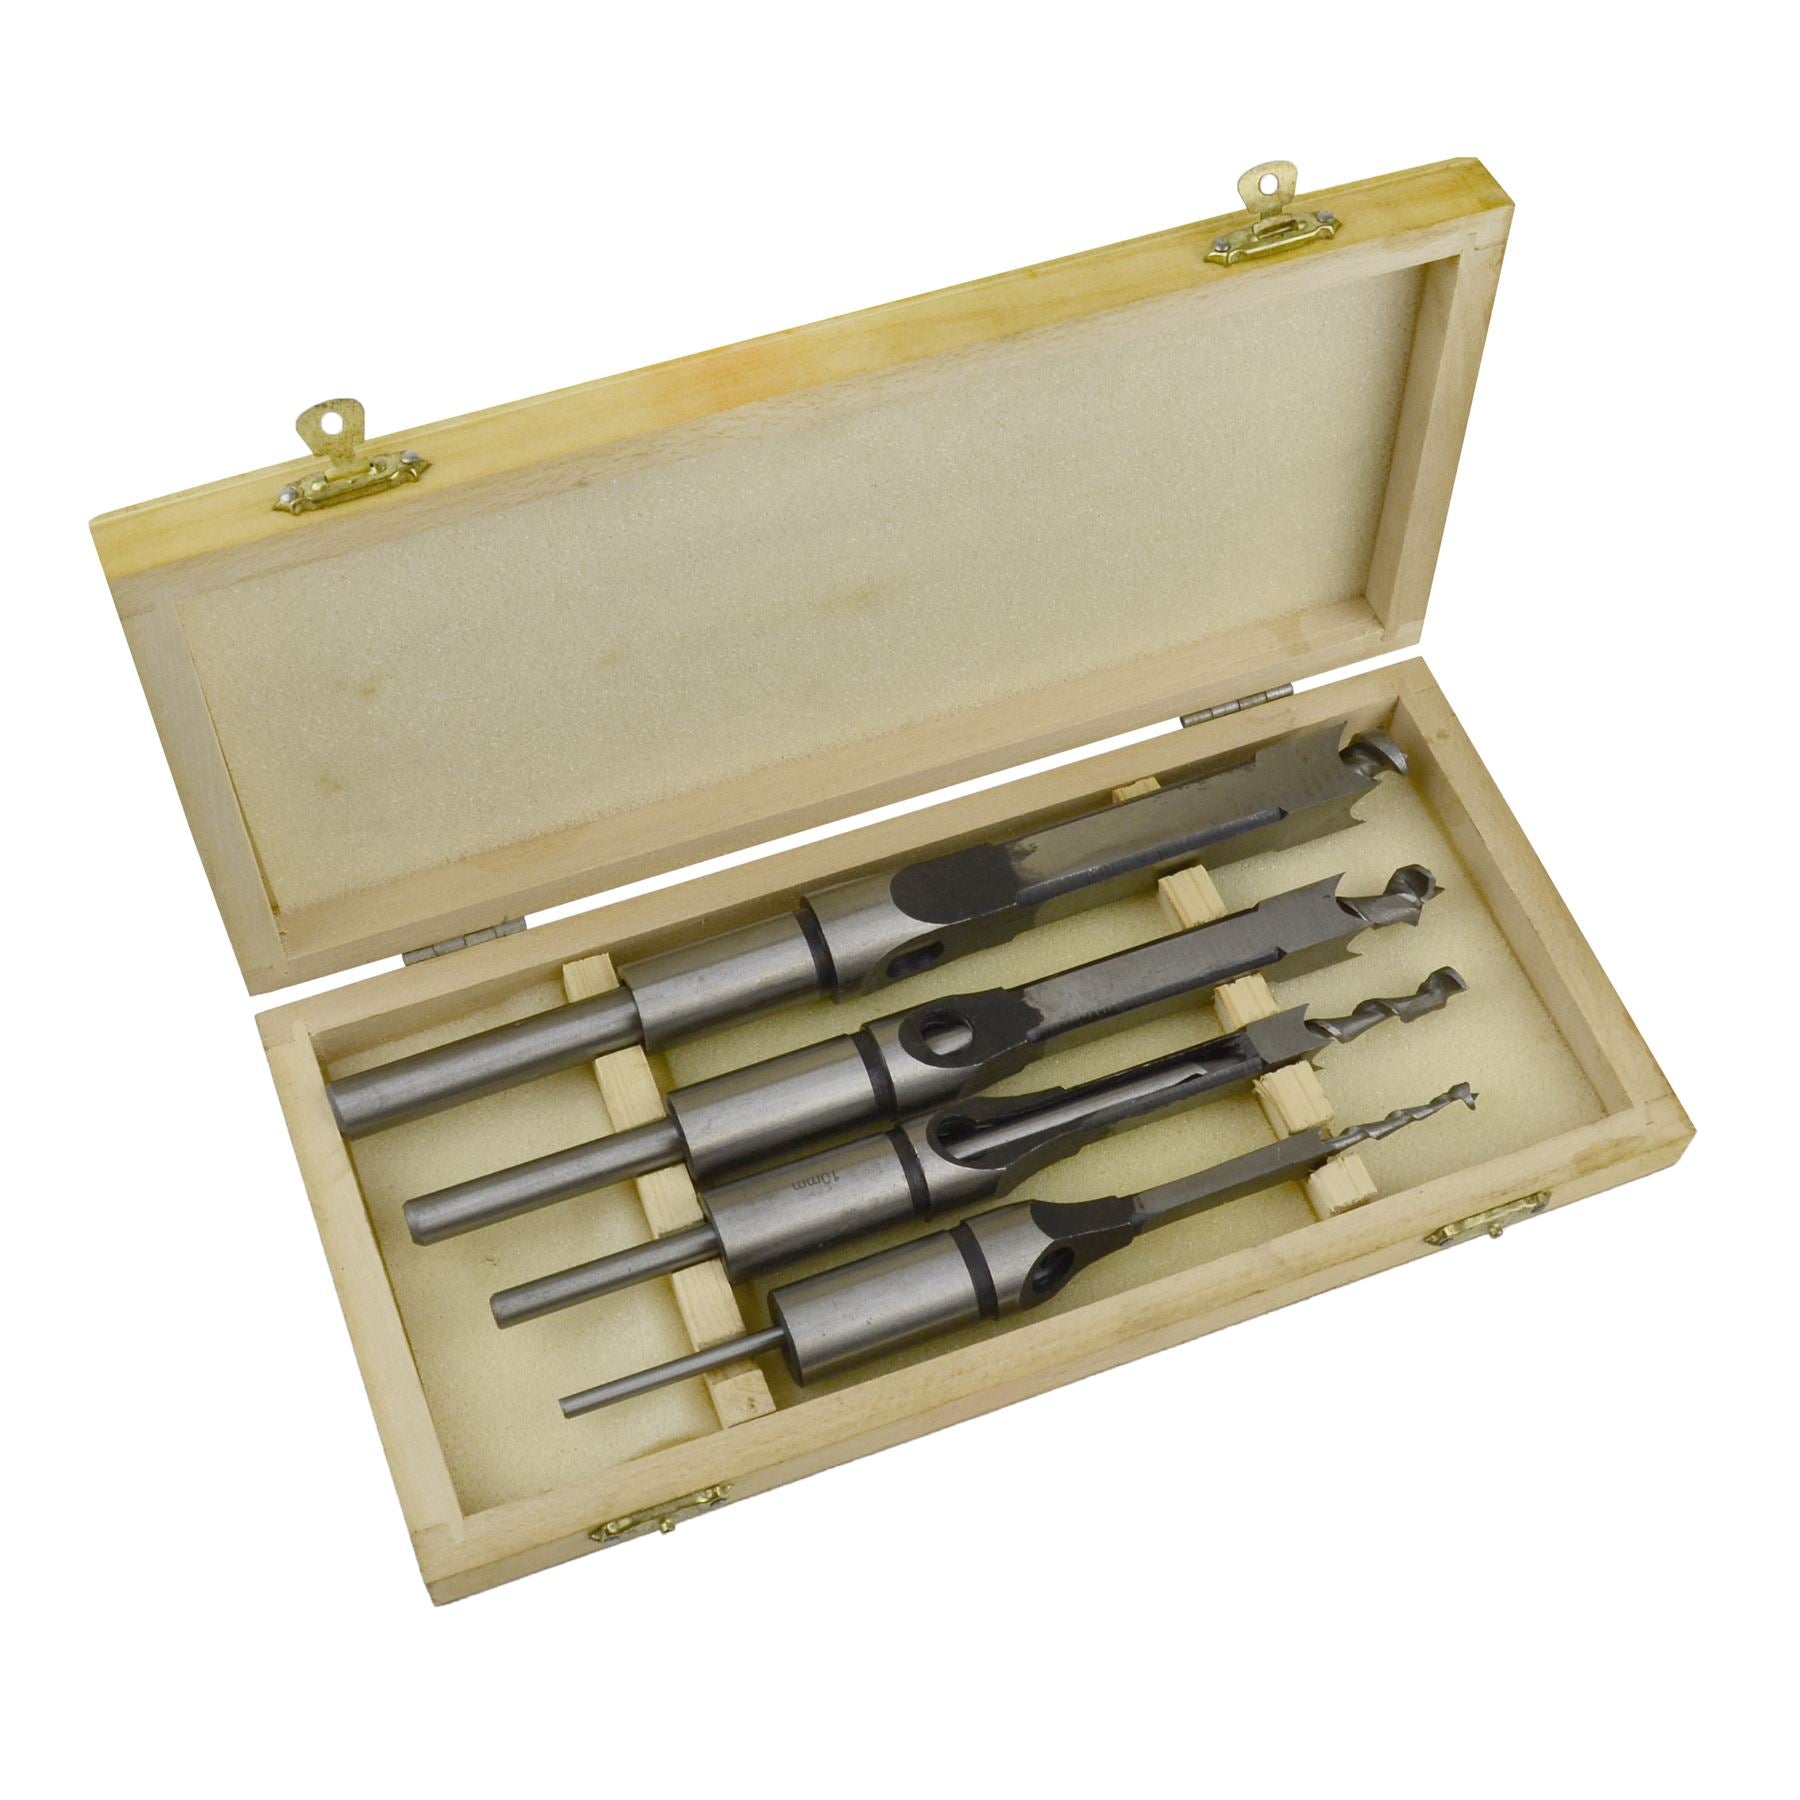 4pc Mortice Drill Tool Set 6,10,13 & 16mm Chisels In Wood Box Woodworking TE665